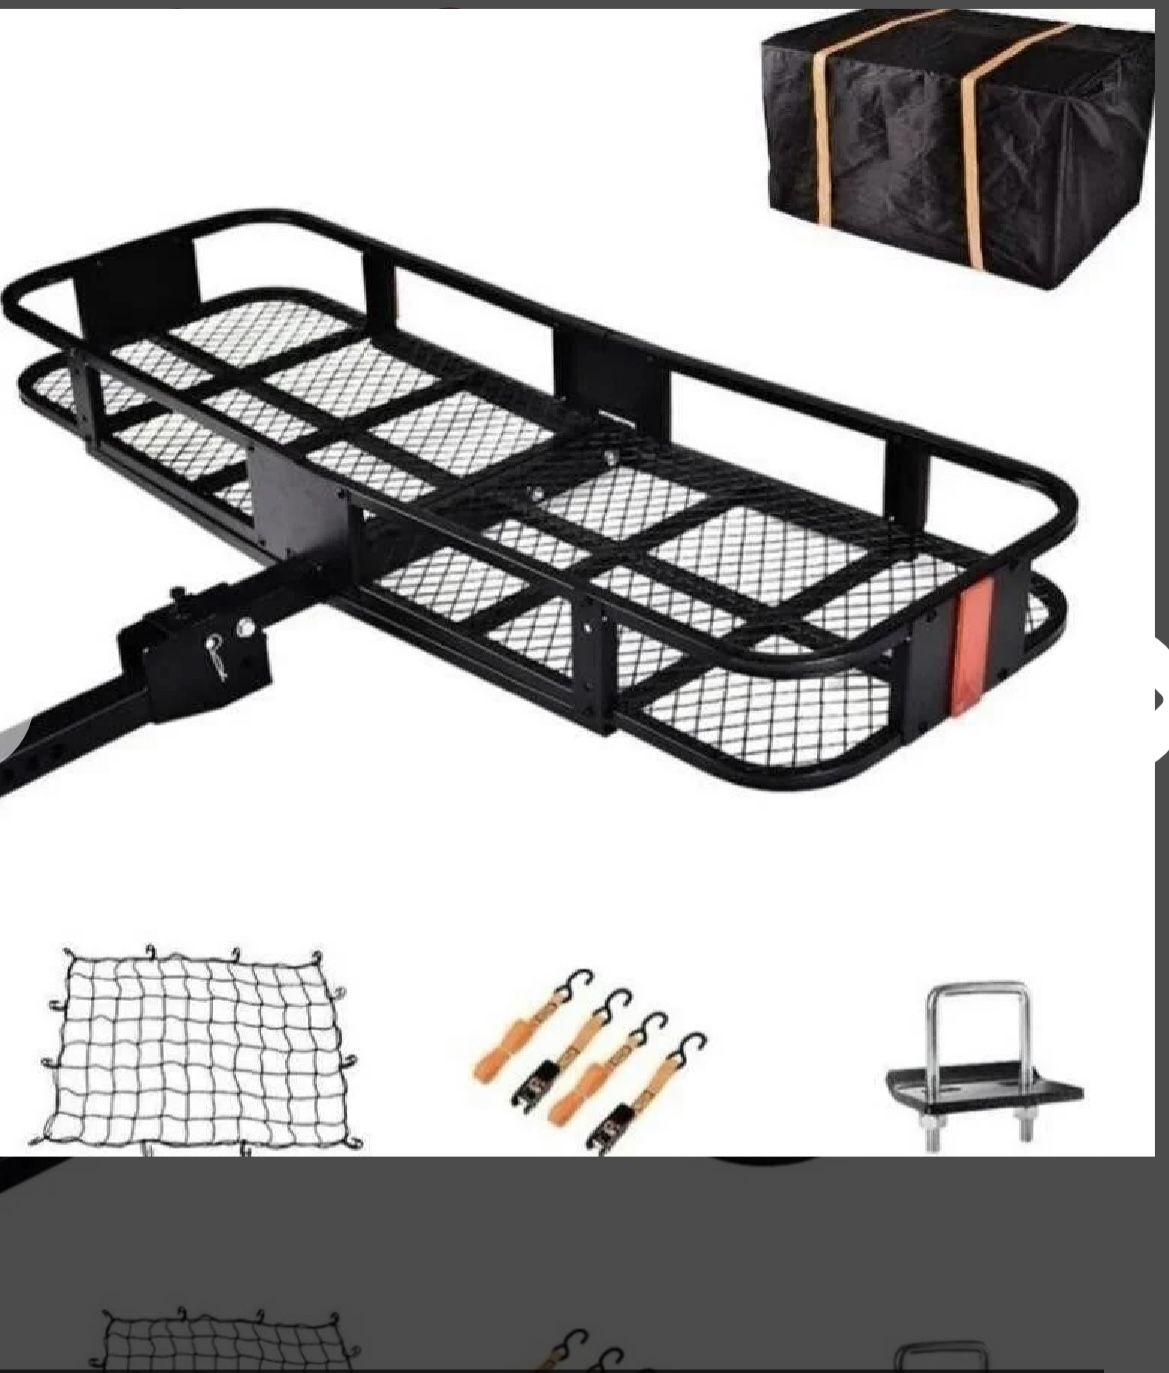 TITIMO 60"X21"X6 FOLDING HITCH MOUNT CARGO CARRIER New in original box still factory